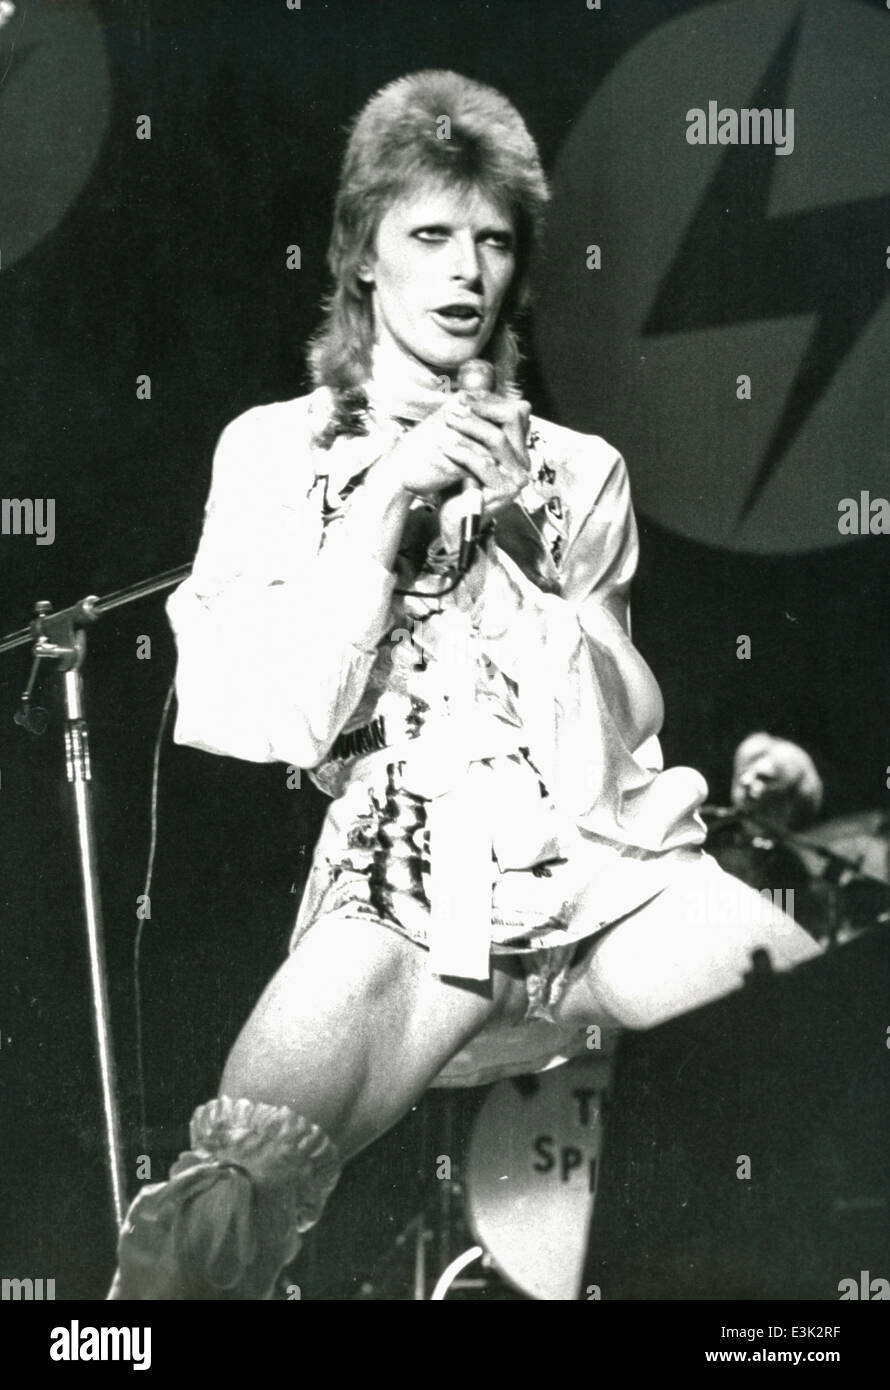 David Bowie a Hammersmith odeon,1973 Foto Stock